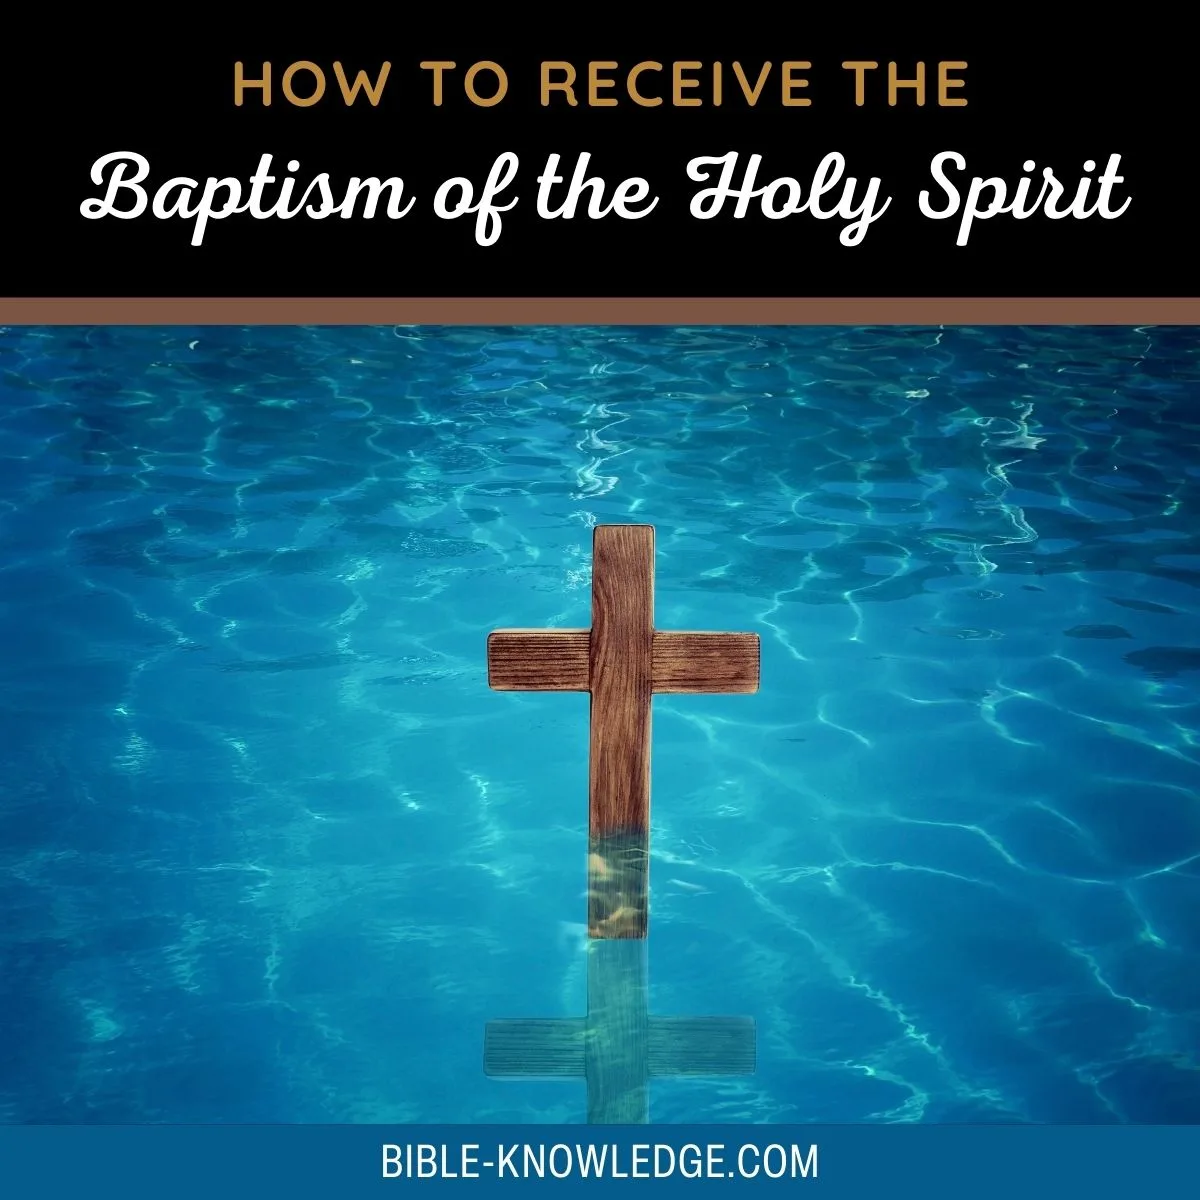 How to Receive The Baptism of the Holy Spirit